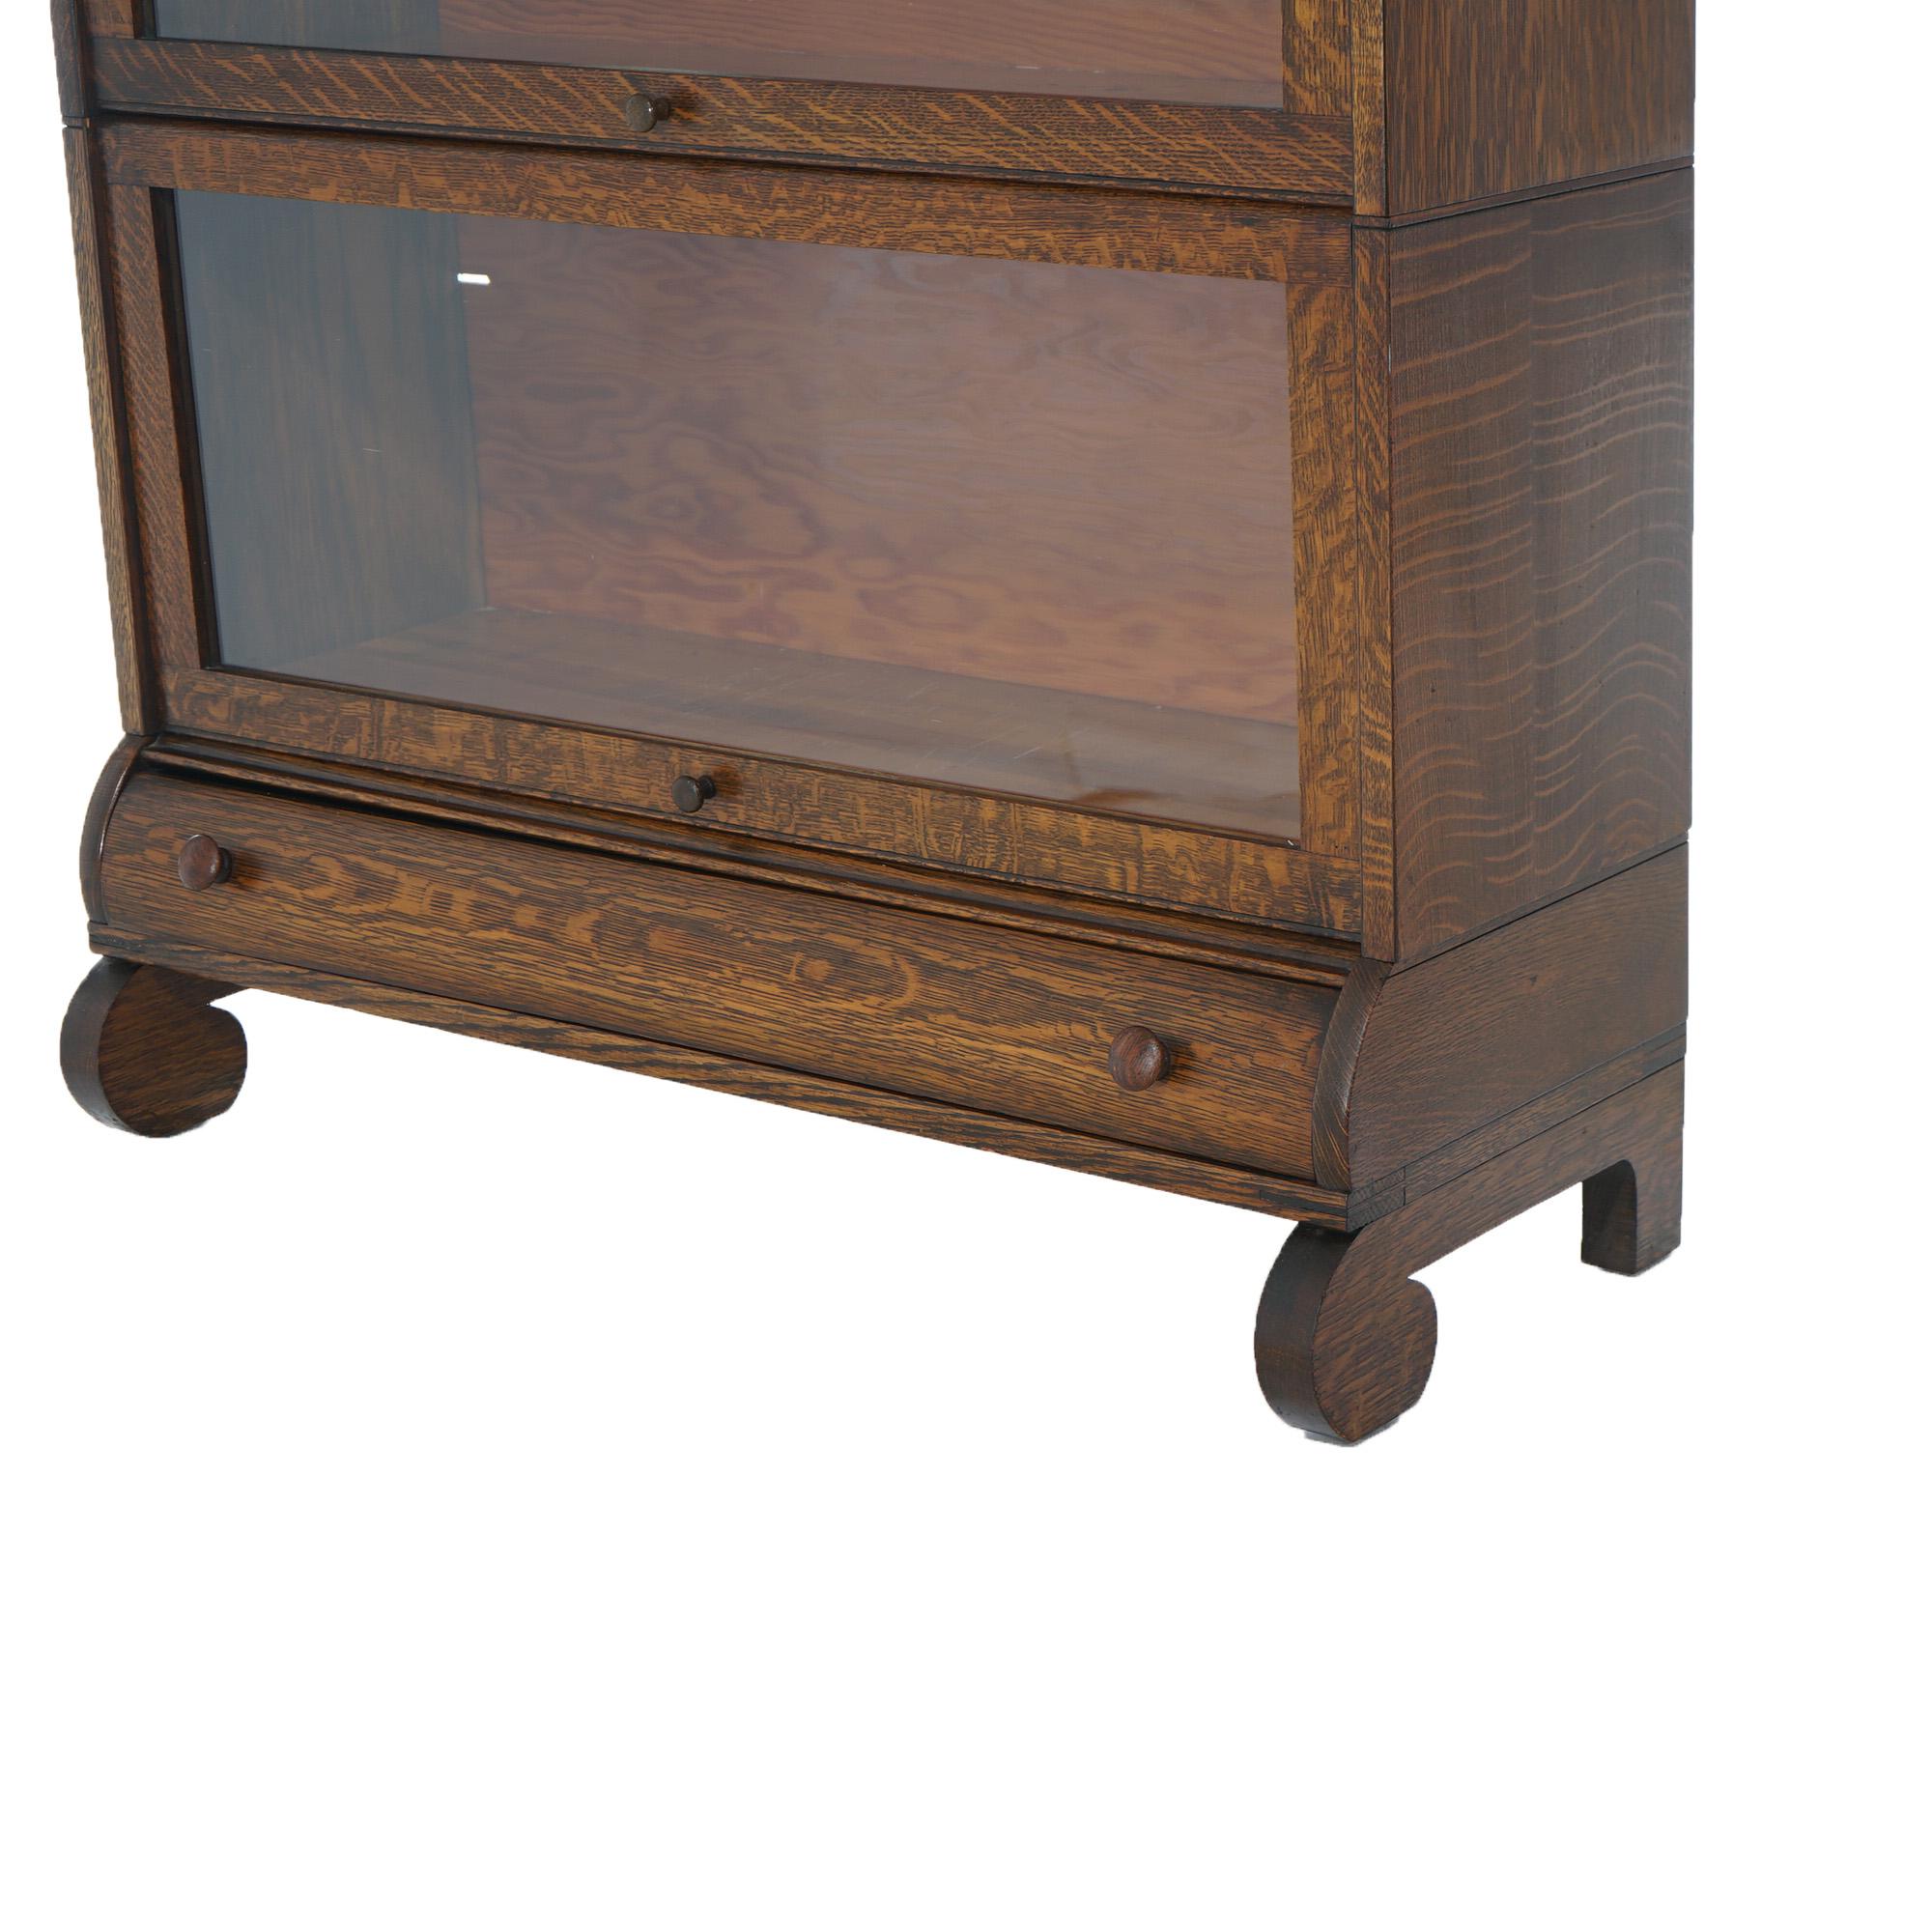 Arts and Crafts Antique Arts & Crafts Lundstrom Oak & Leaded Glass Barrister Bookcase, c1910